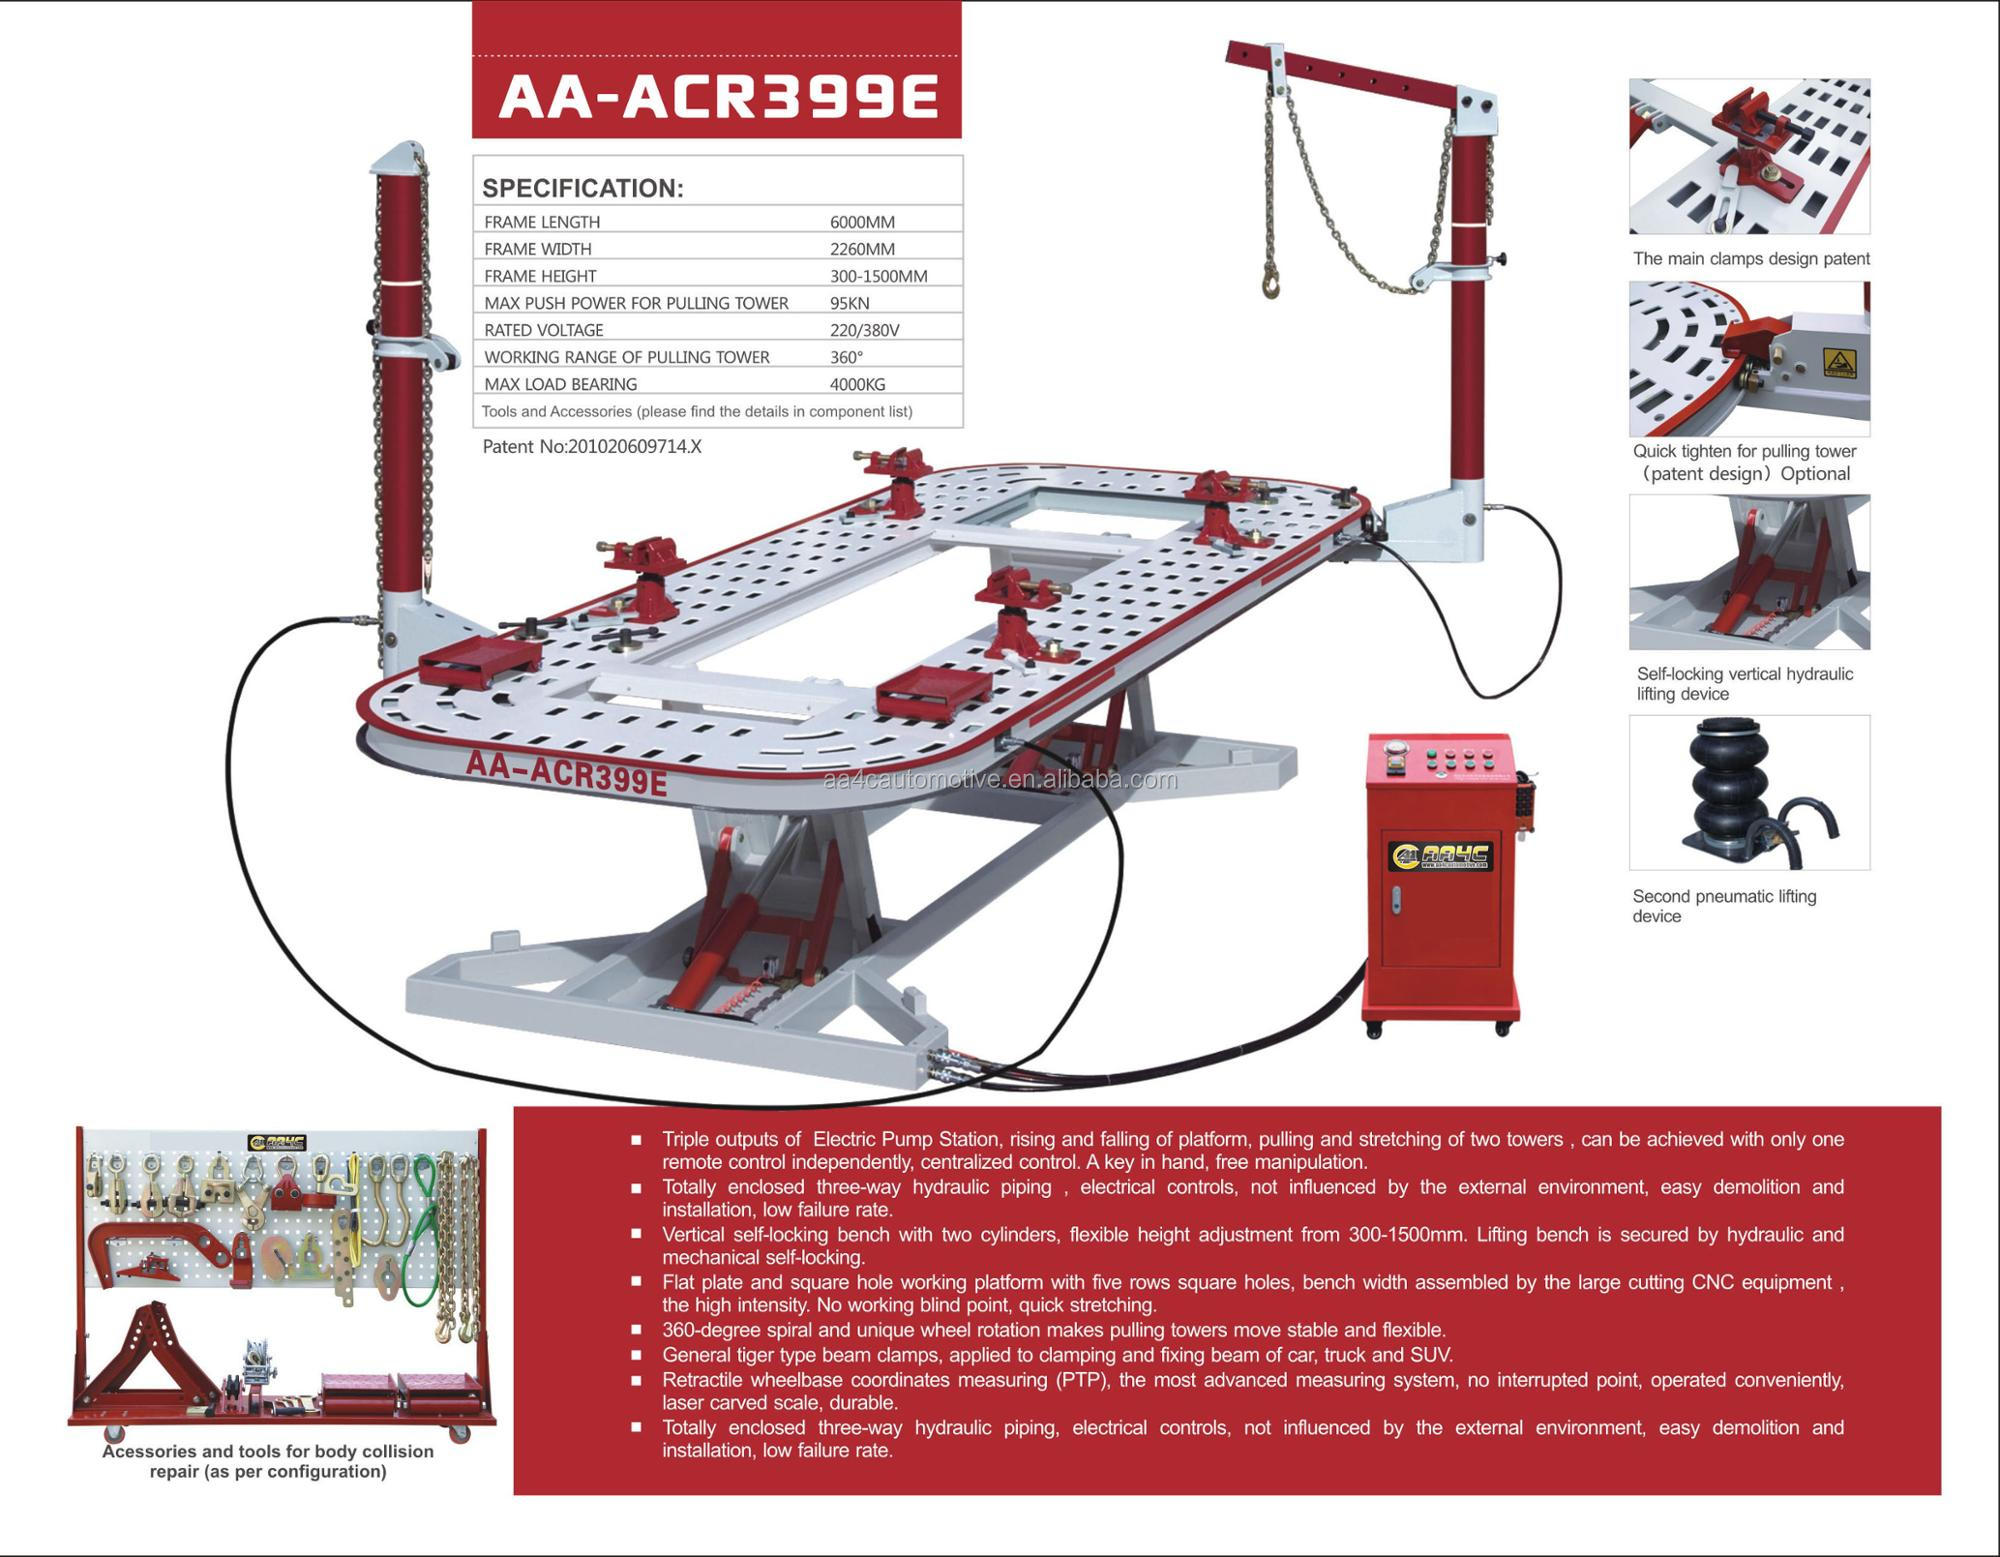 AA4C Auto Body Repair System chassis straightening machine Auto Collision Repair System. AA-ACR399